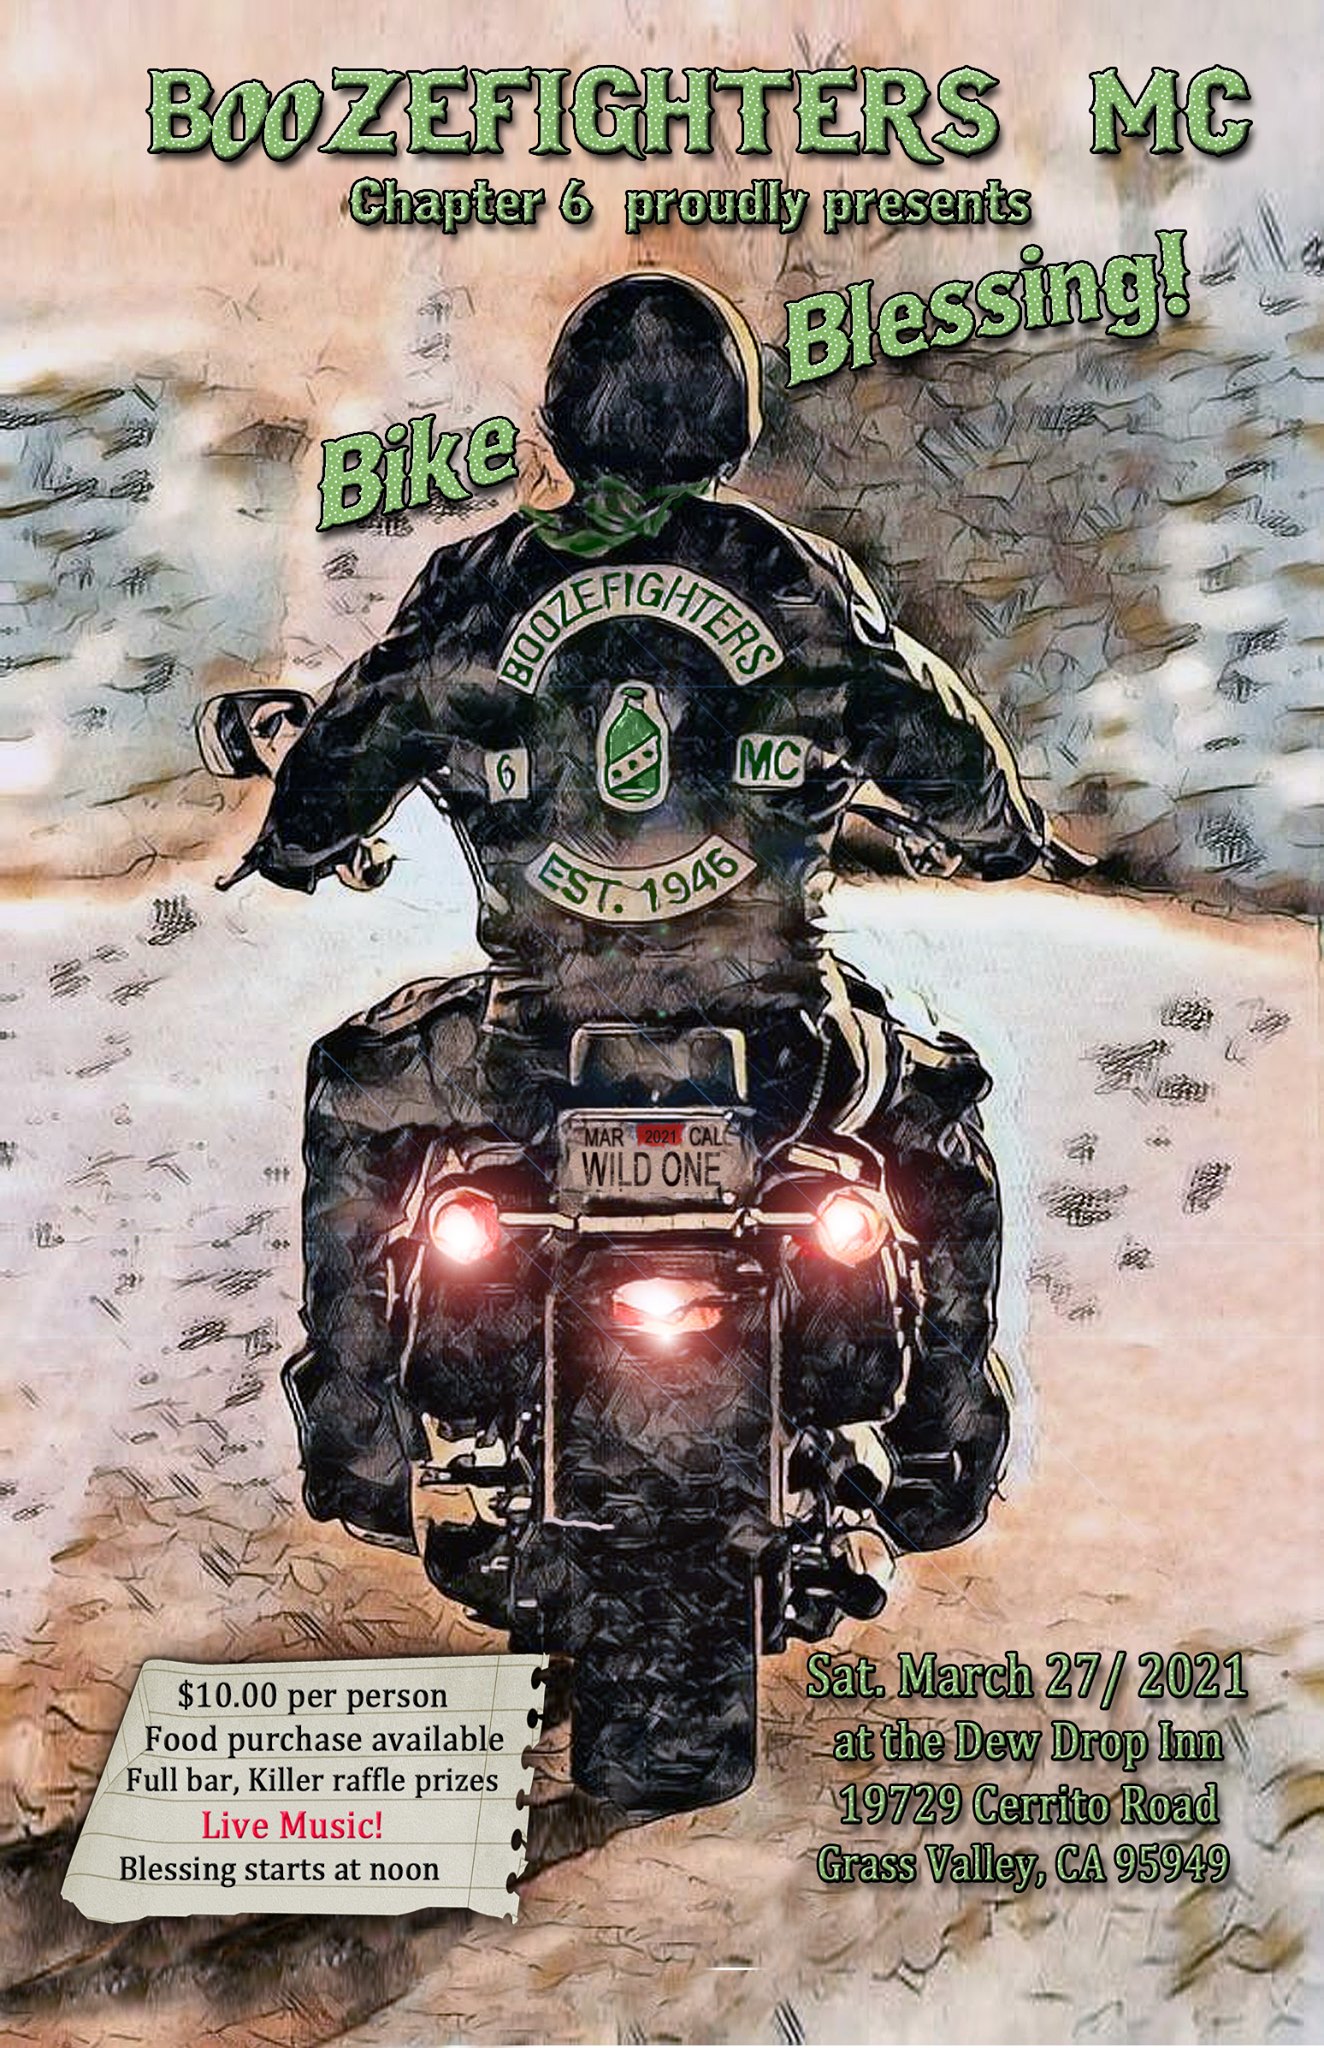 Boozefighters MC Chapter 6 Bike Blessing